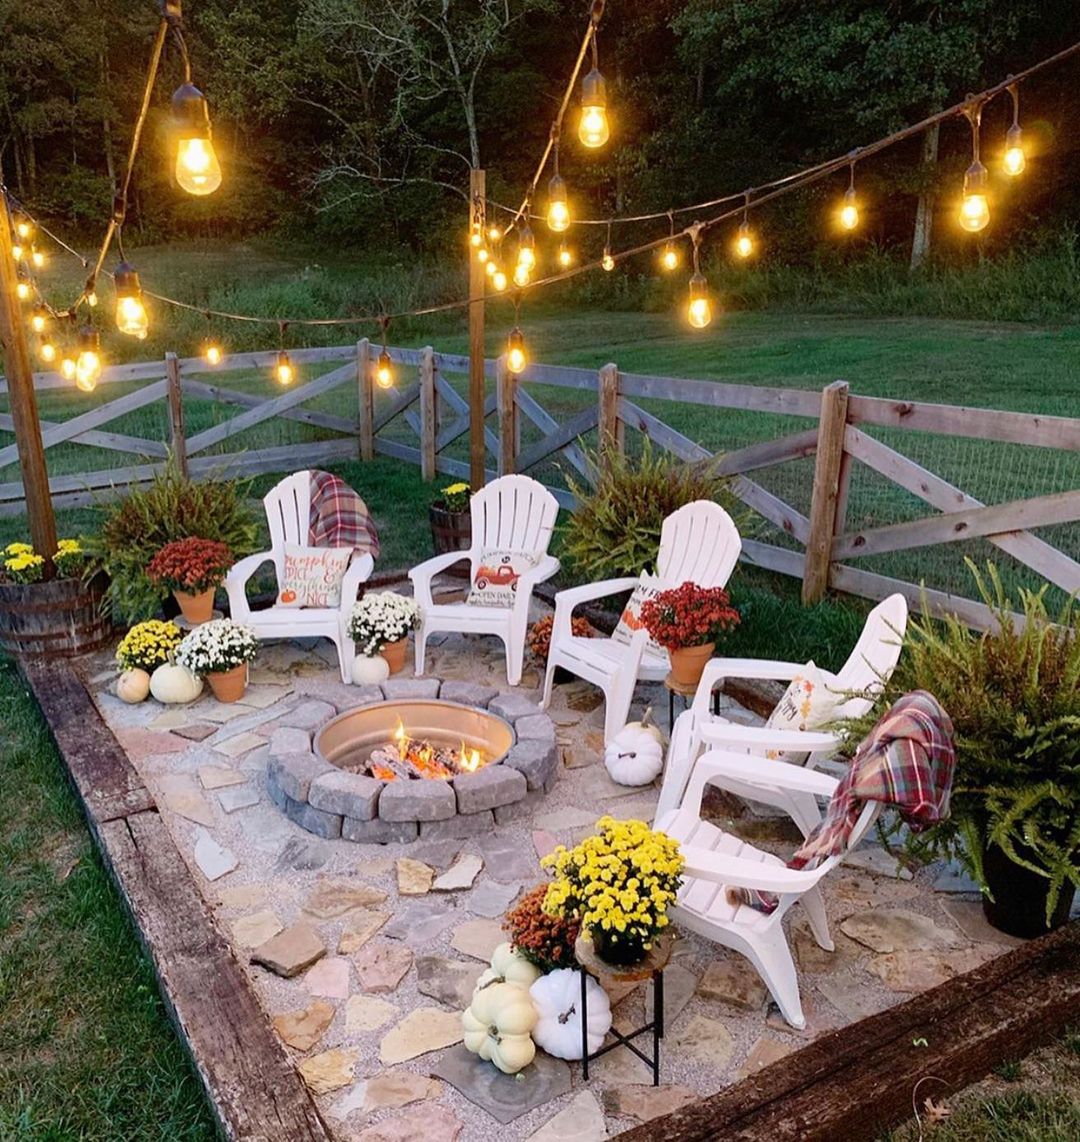 Separate Fire Pit Seating Area with String Lights Overhead. Photo by Instagram user @crateandcottage